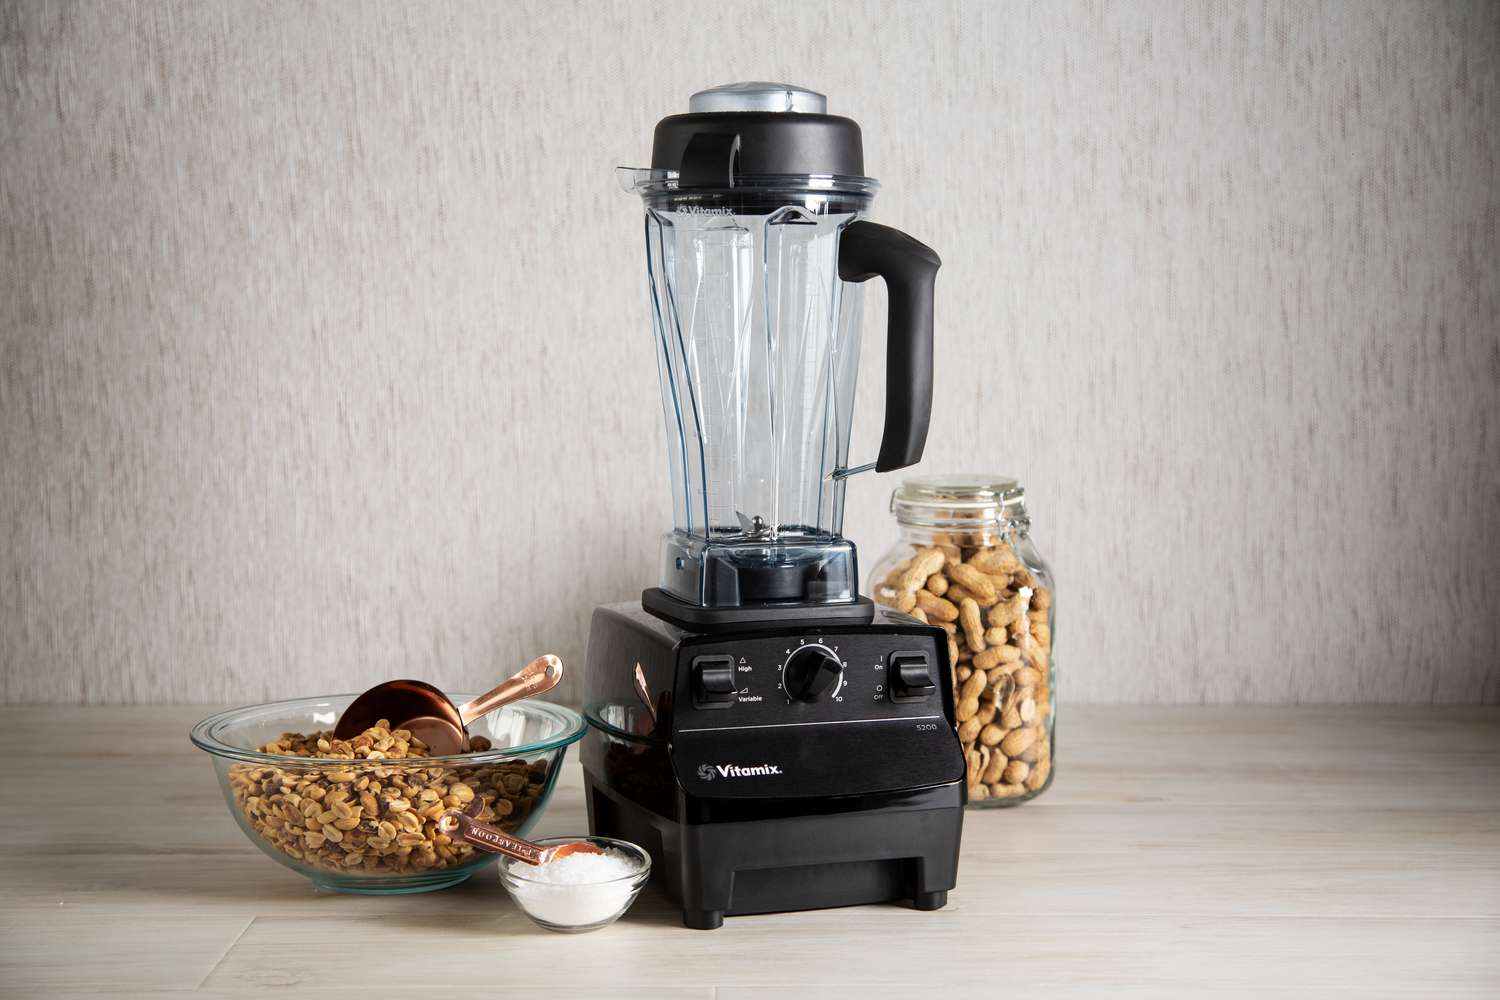 How Many Watts Is A Vitamix 5200 Blender